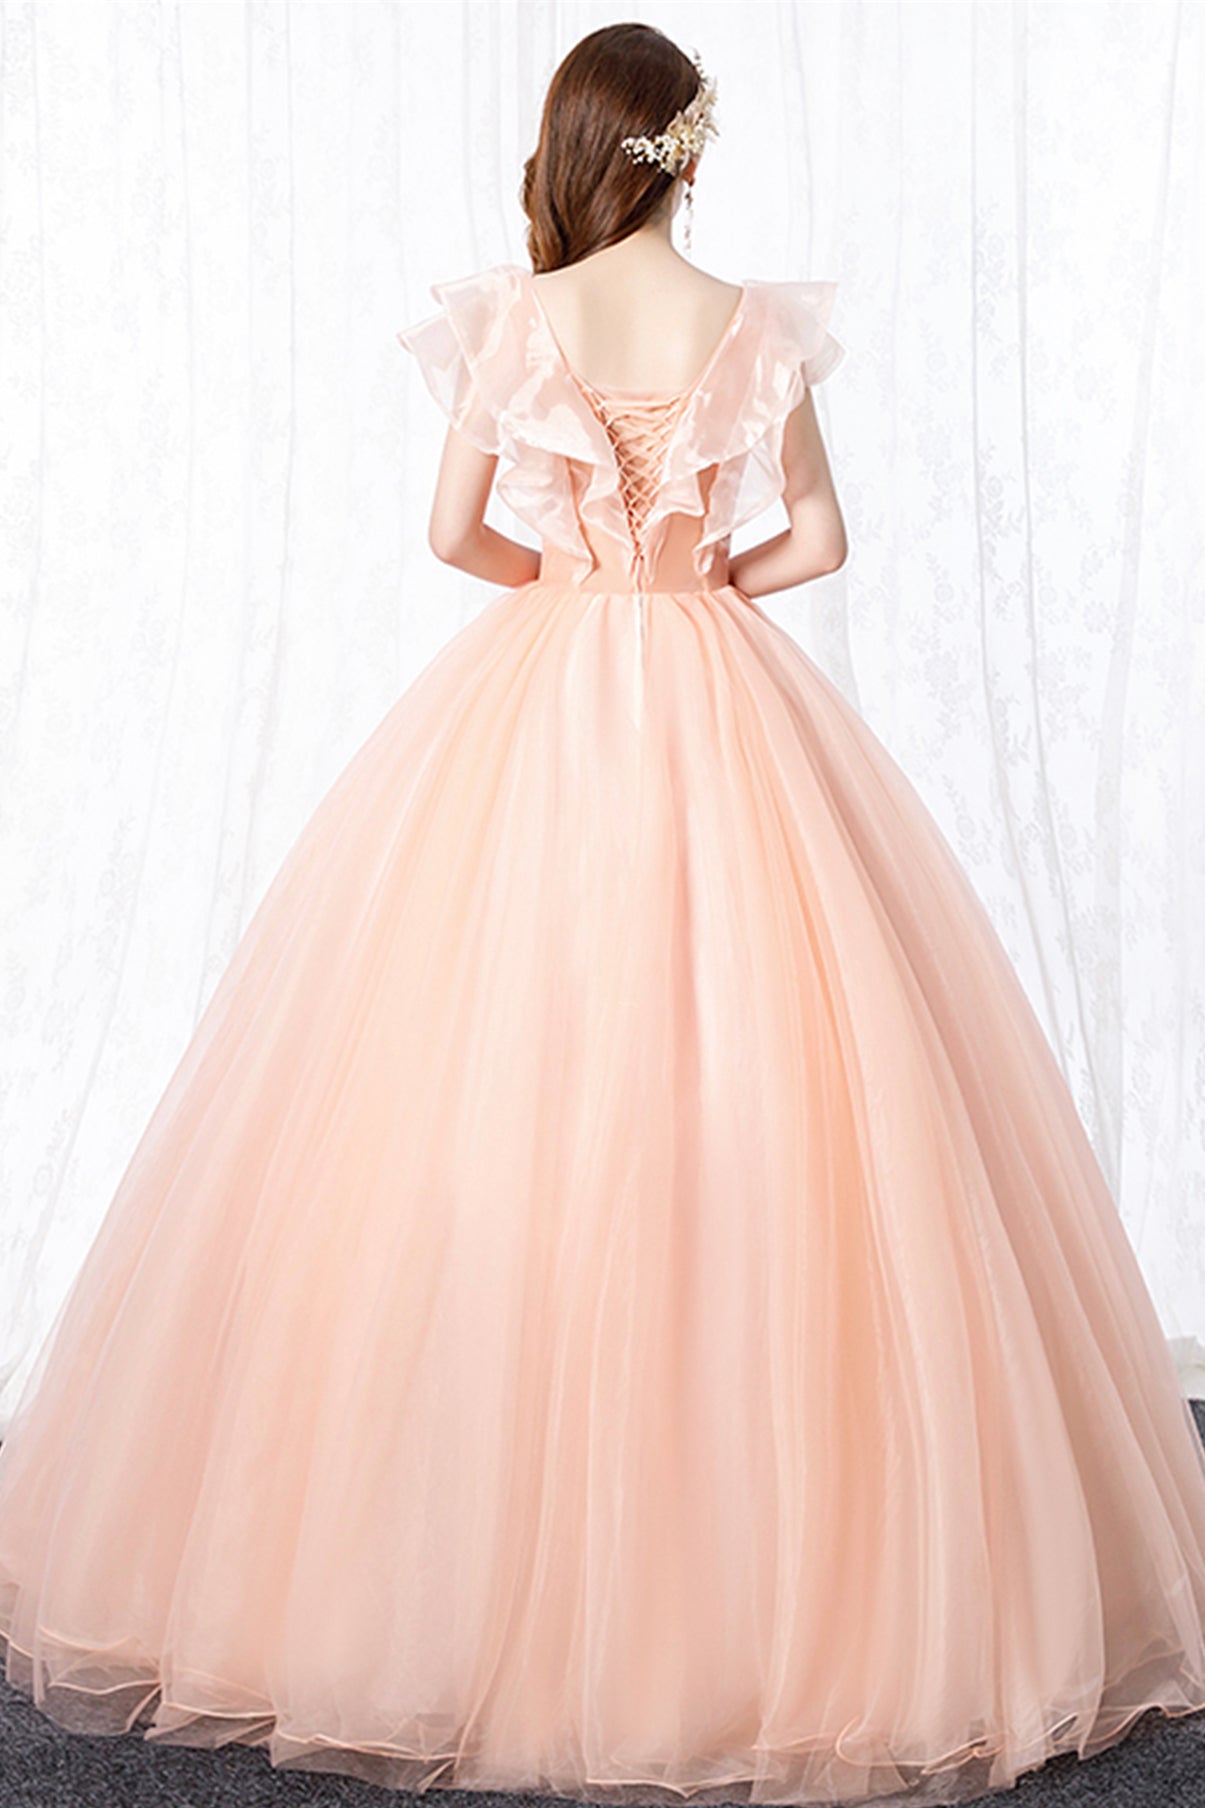 PINK TULLE LACE LONG BALL GOWN DRESS FORMAL DRESS PROM DRESS EVENING DRESS   cg18411